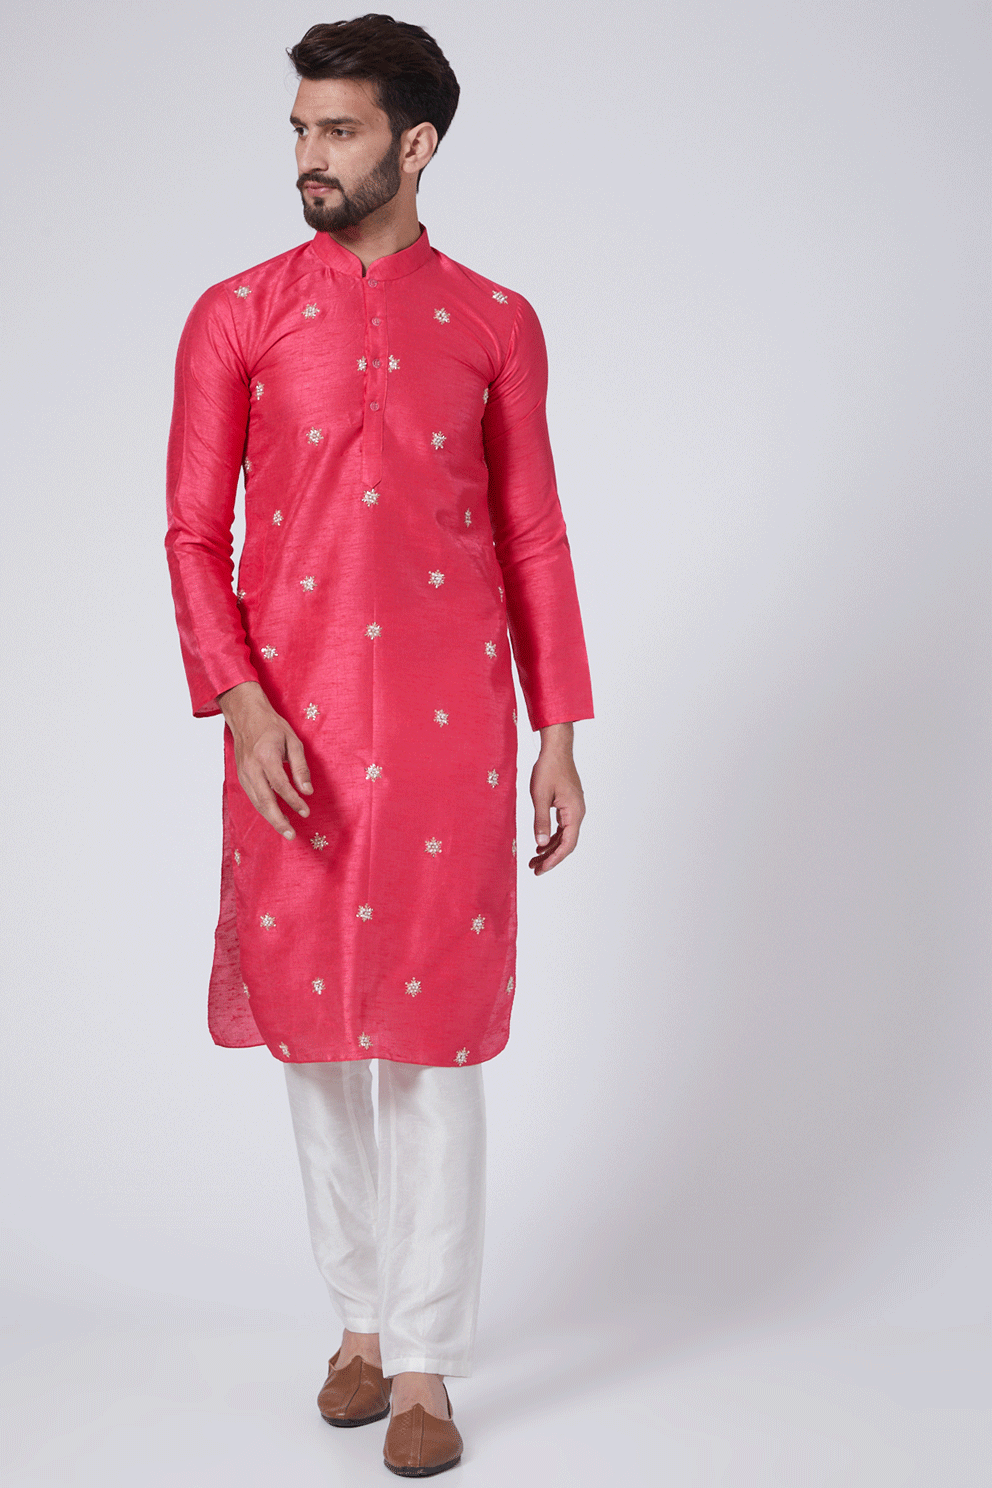 Hot Pink Embroidered Kurta Set with White Pant